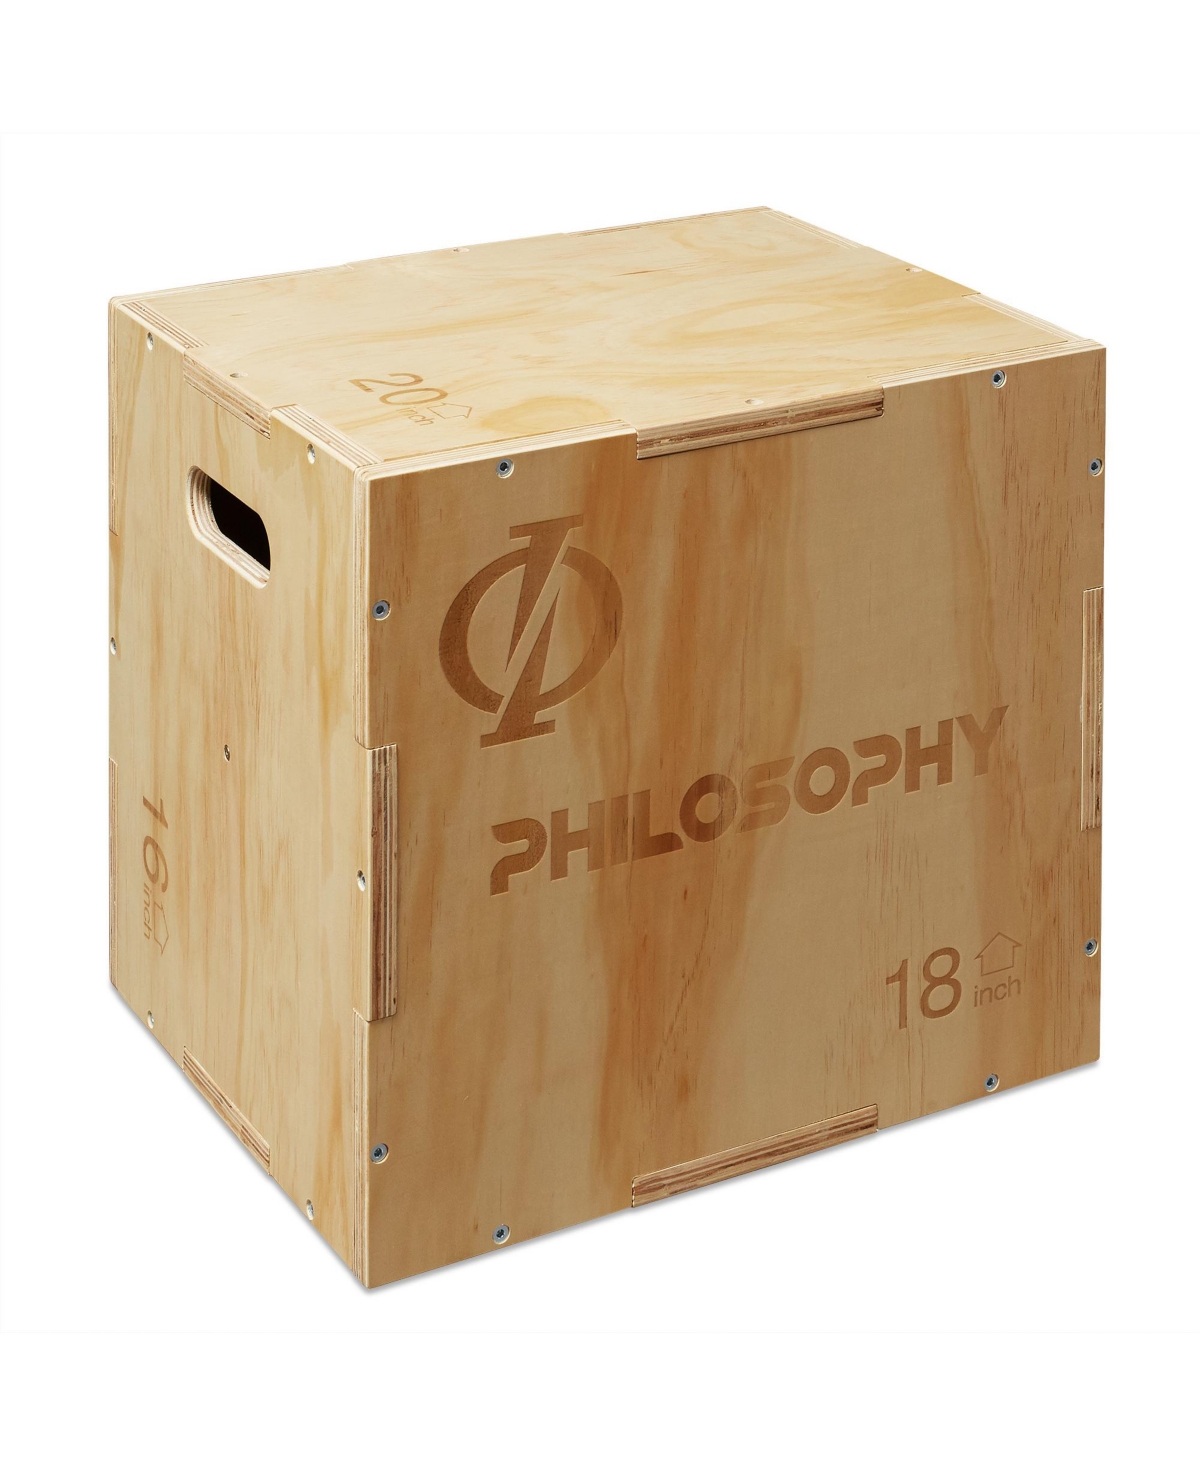 3 in 1 Wood Plyometric Box - 20" x 18" x 16" Jumping Plyo Box for Training and Conditioning - Natural